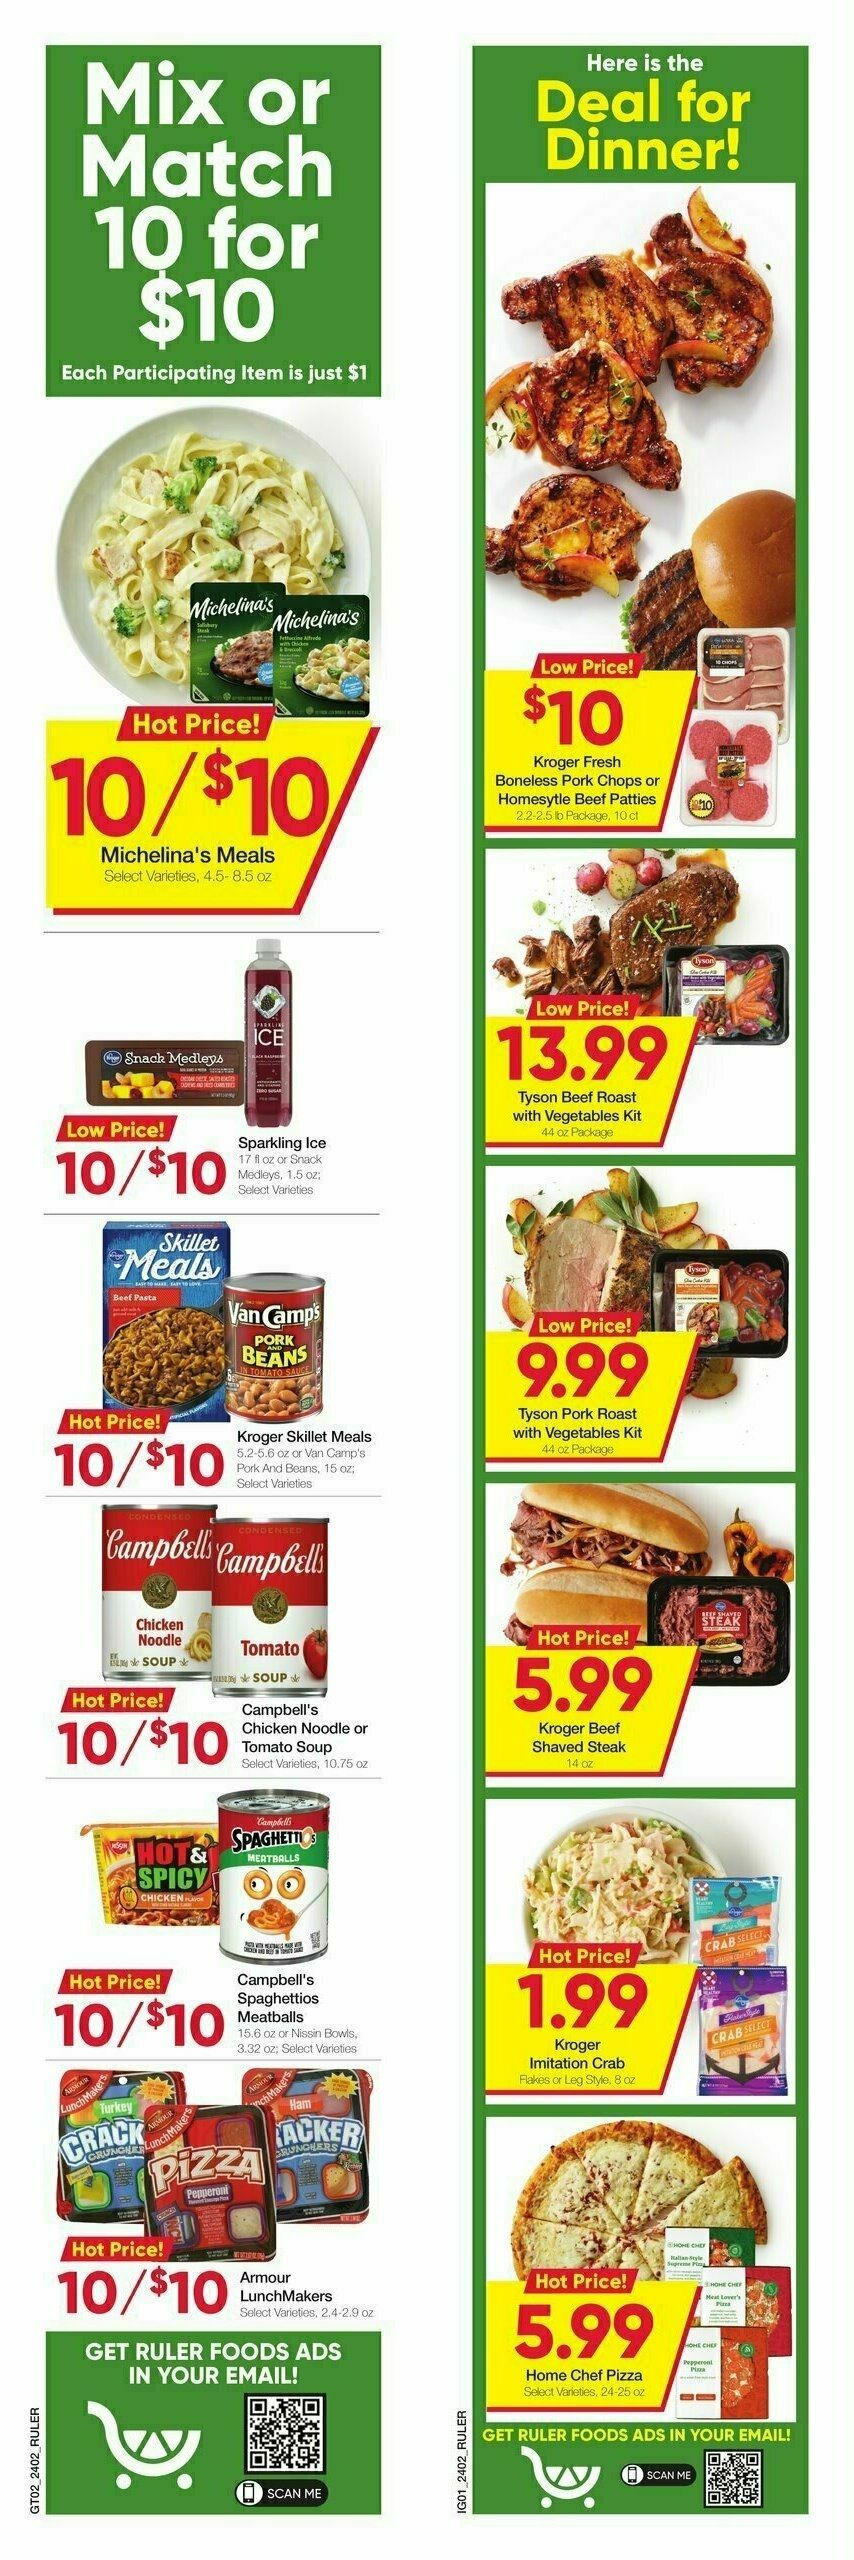 Ruler Foods Weekly Ad from February 14